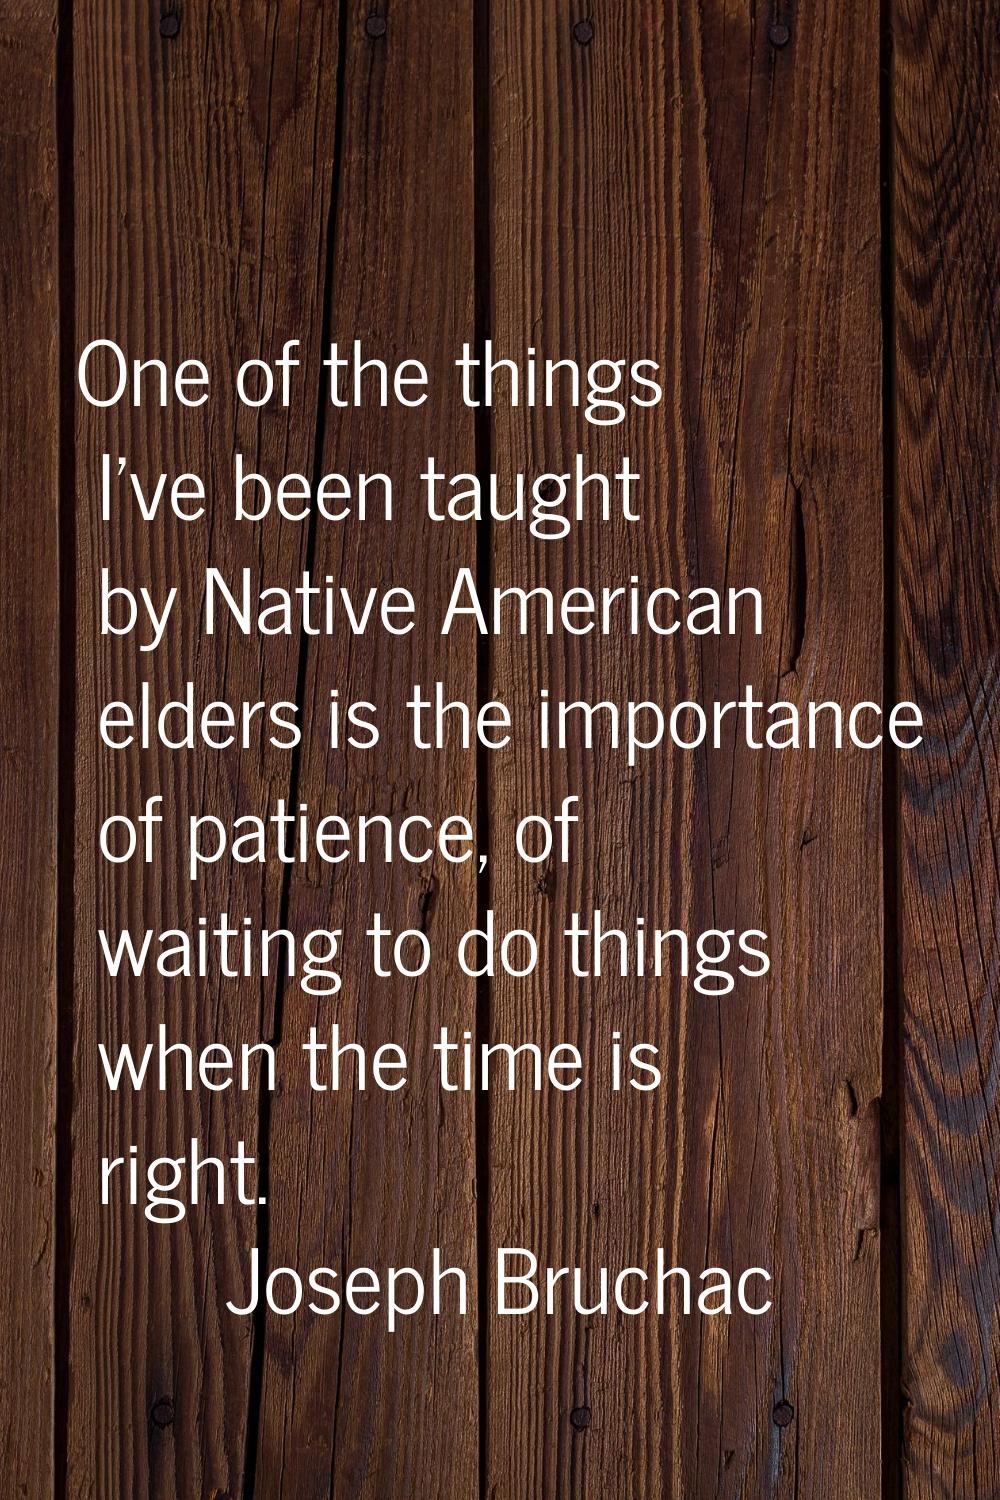 One of the things I've been taught by Native American elders is the importance of patience, of wait